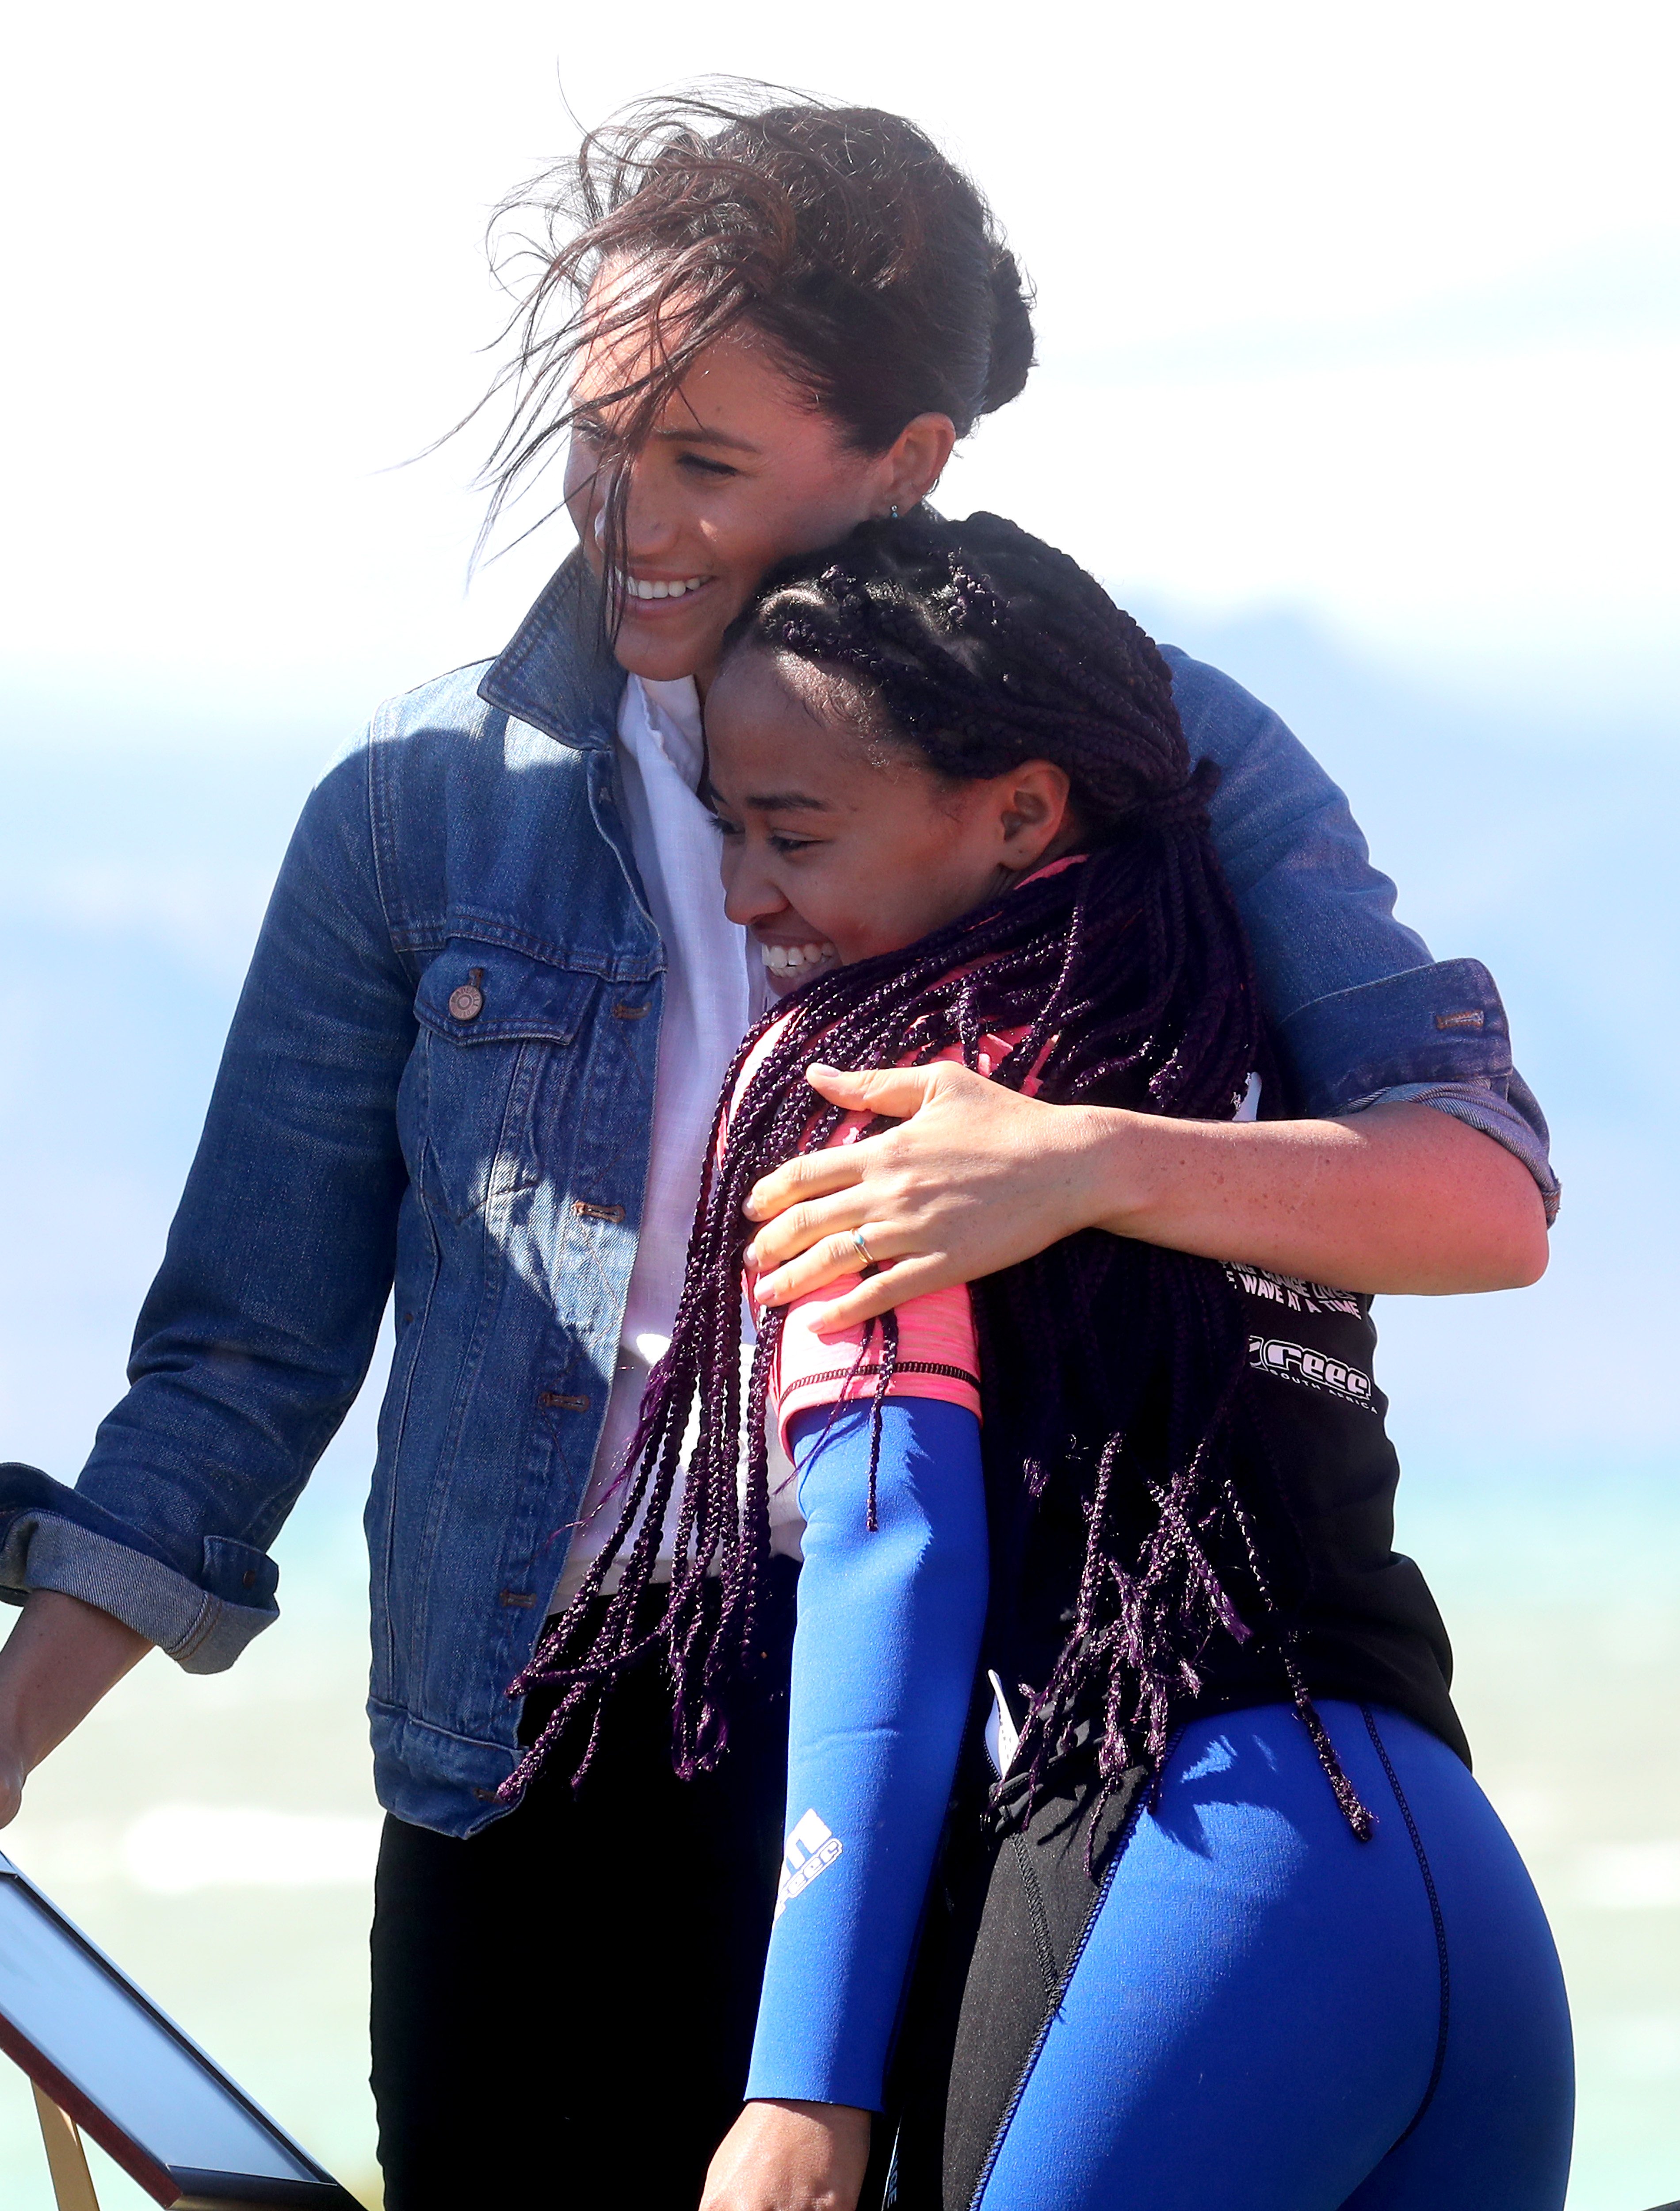 Meghan, Duchess of Sussex hugs a surf mentor as she visits Waves for Change, an NGO, at Monwabisi Beach, with Prince Harry, Duke of Sussex on September 24, 2019 | Source: Getty Images